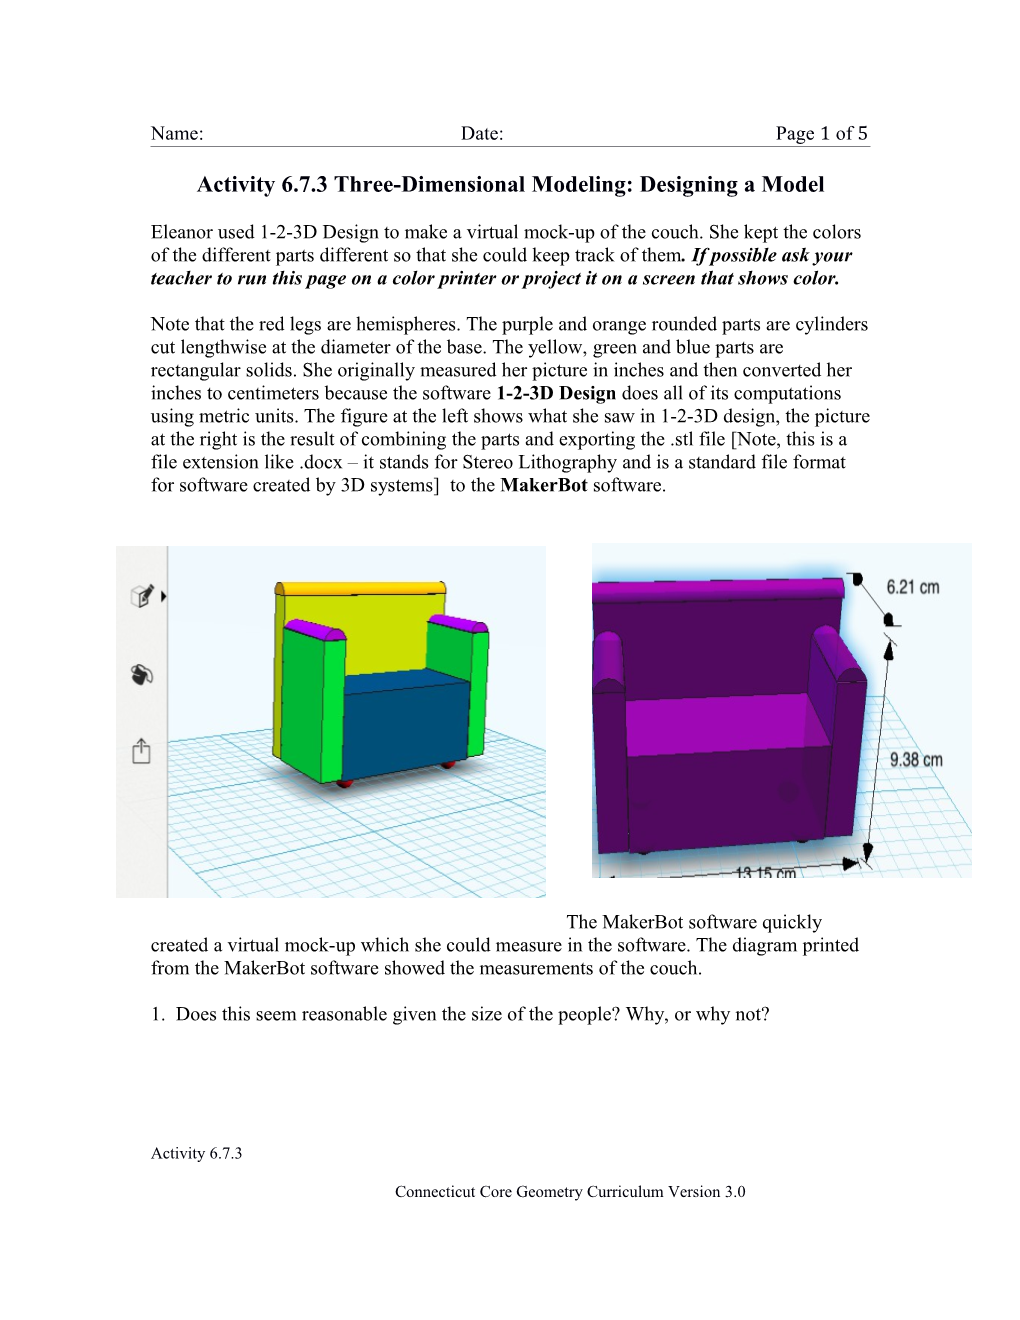 Activity 6.7.3 Three-Dimensional Modeling:Designing a Model